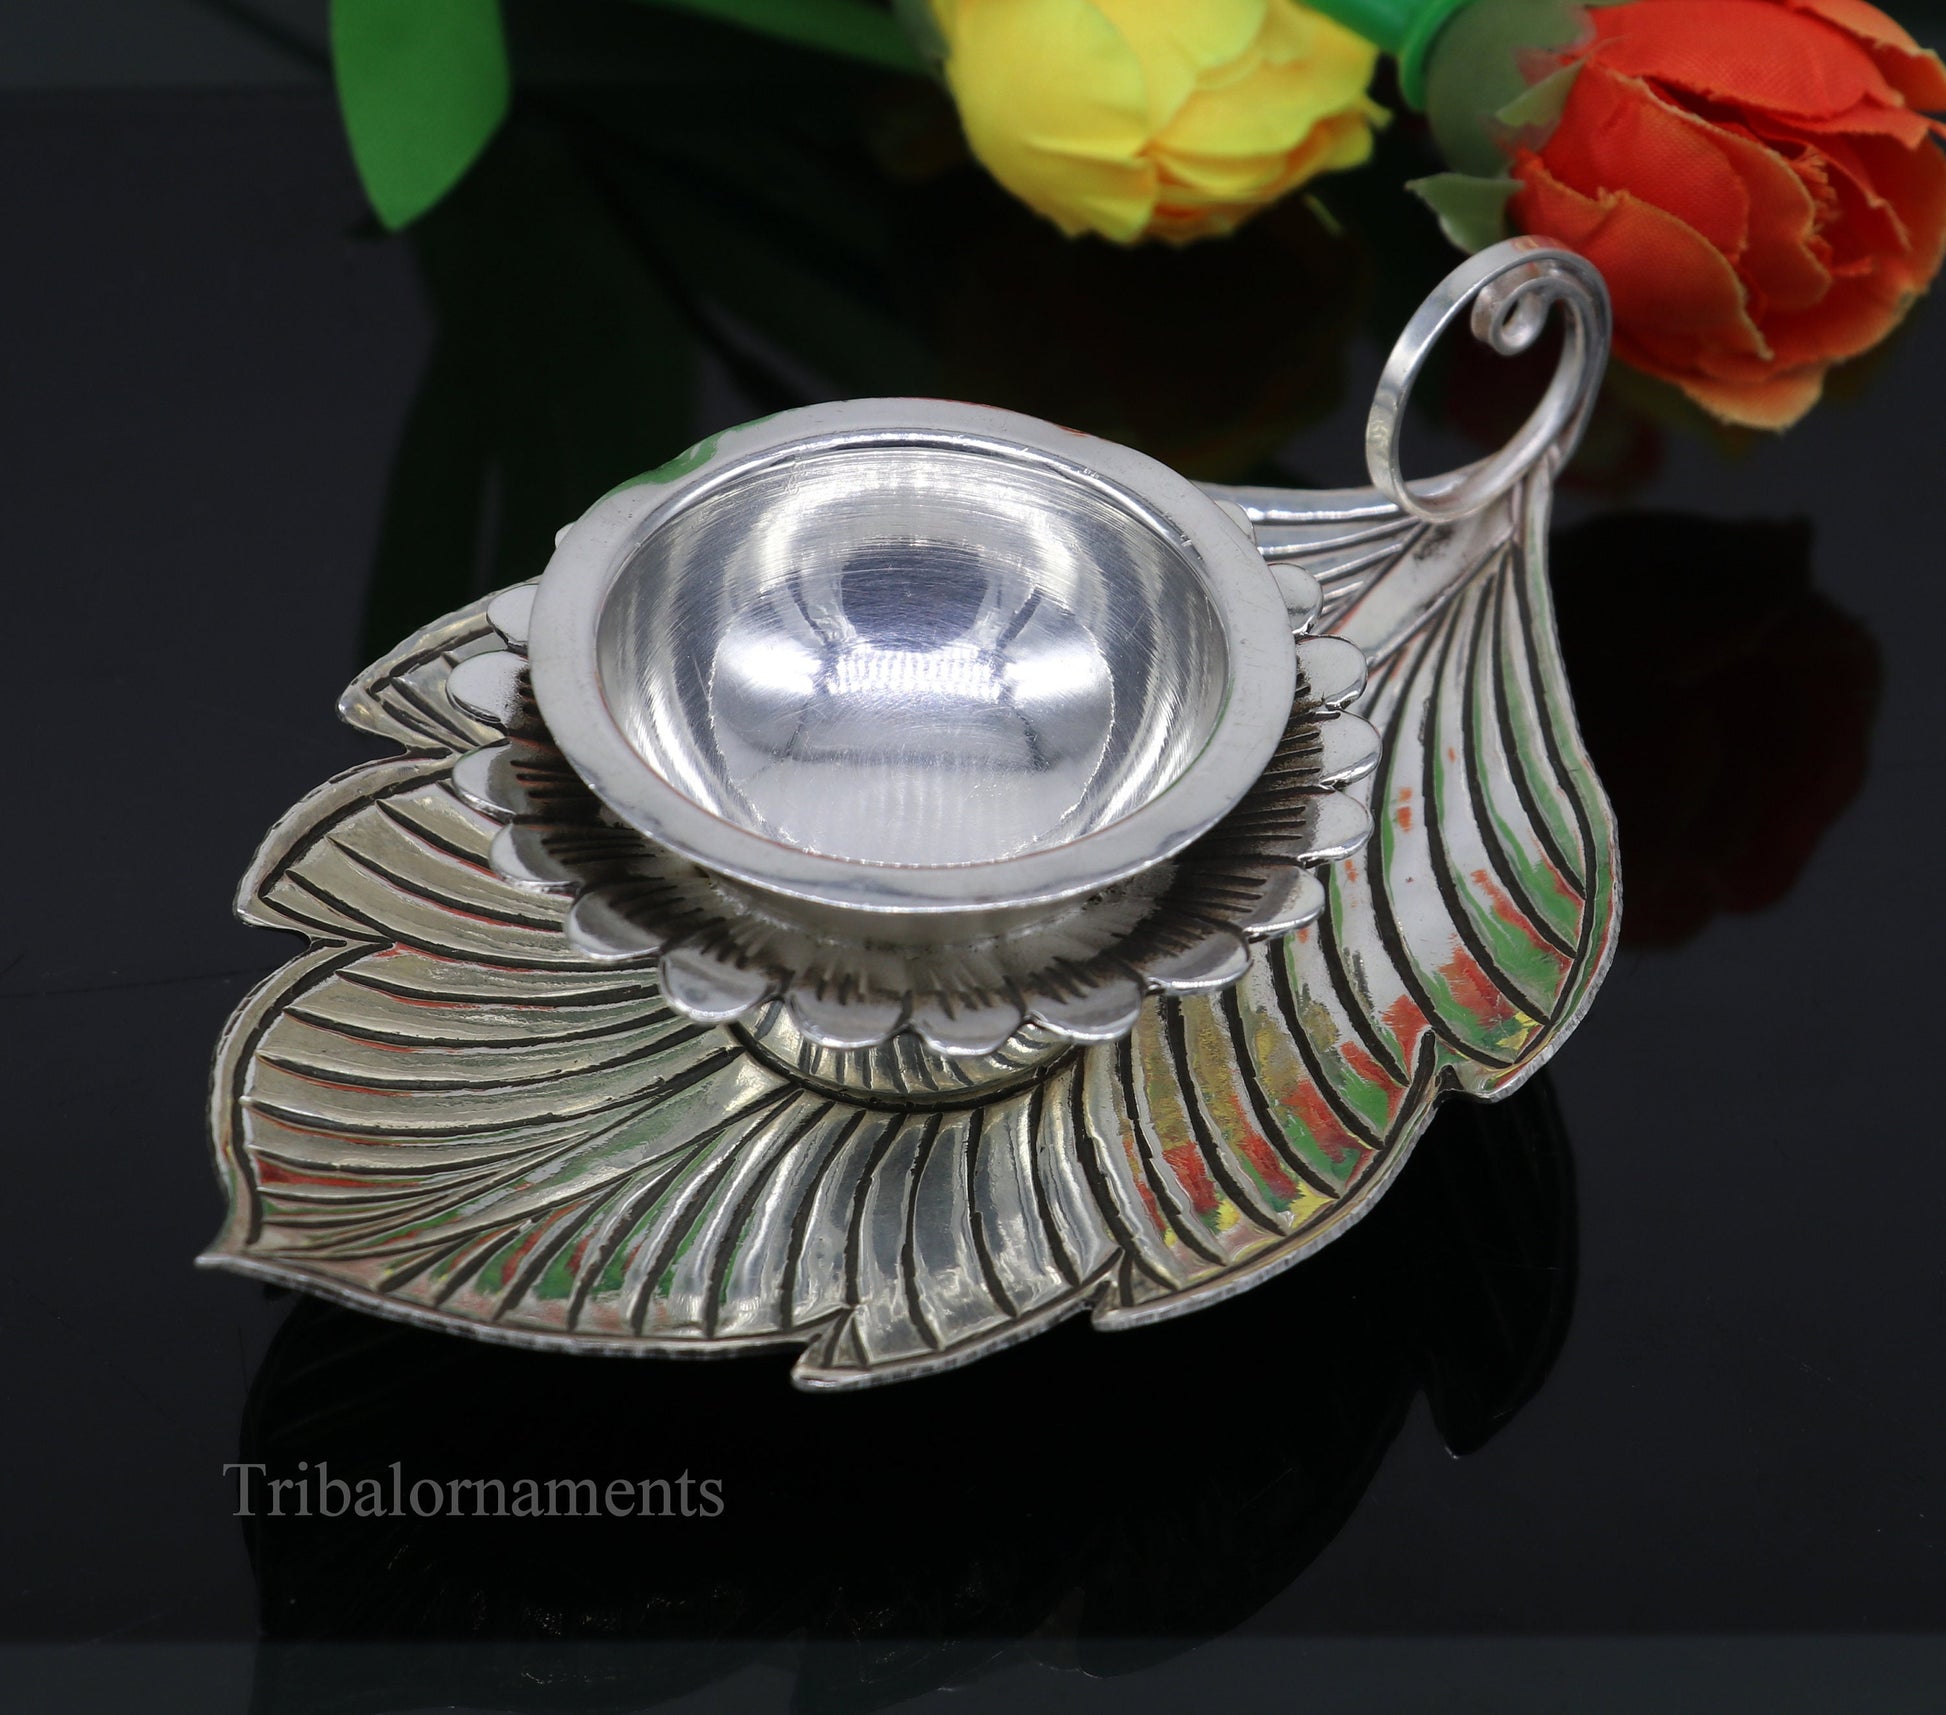 925 sterling silver Divine oil lamp, stunning tree leaf vintage design lamp, best gifting puja utensils or article from India su480 - TRIBAL ORNAMENTS